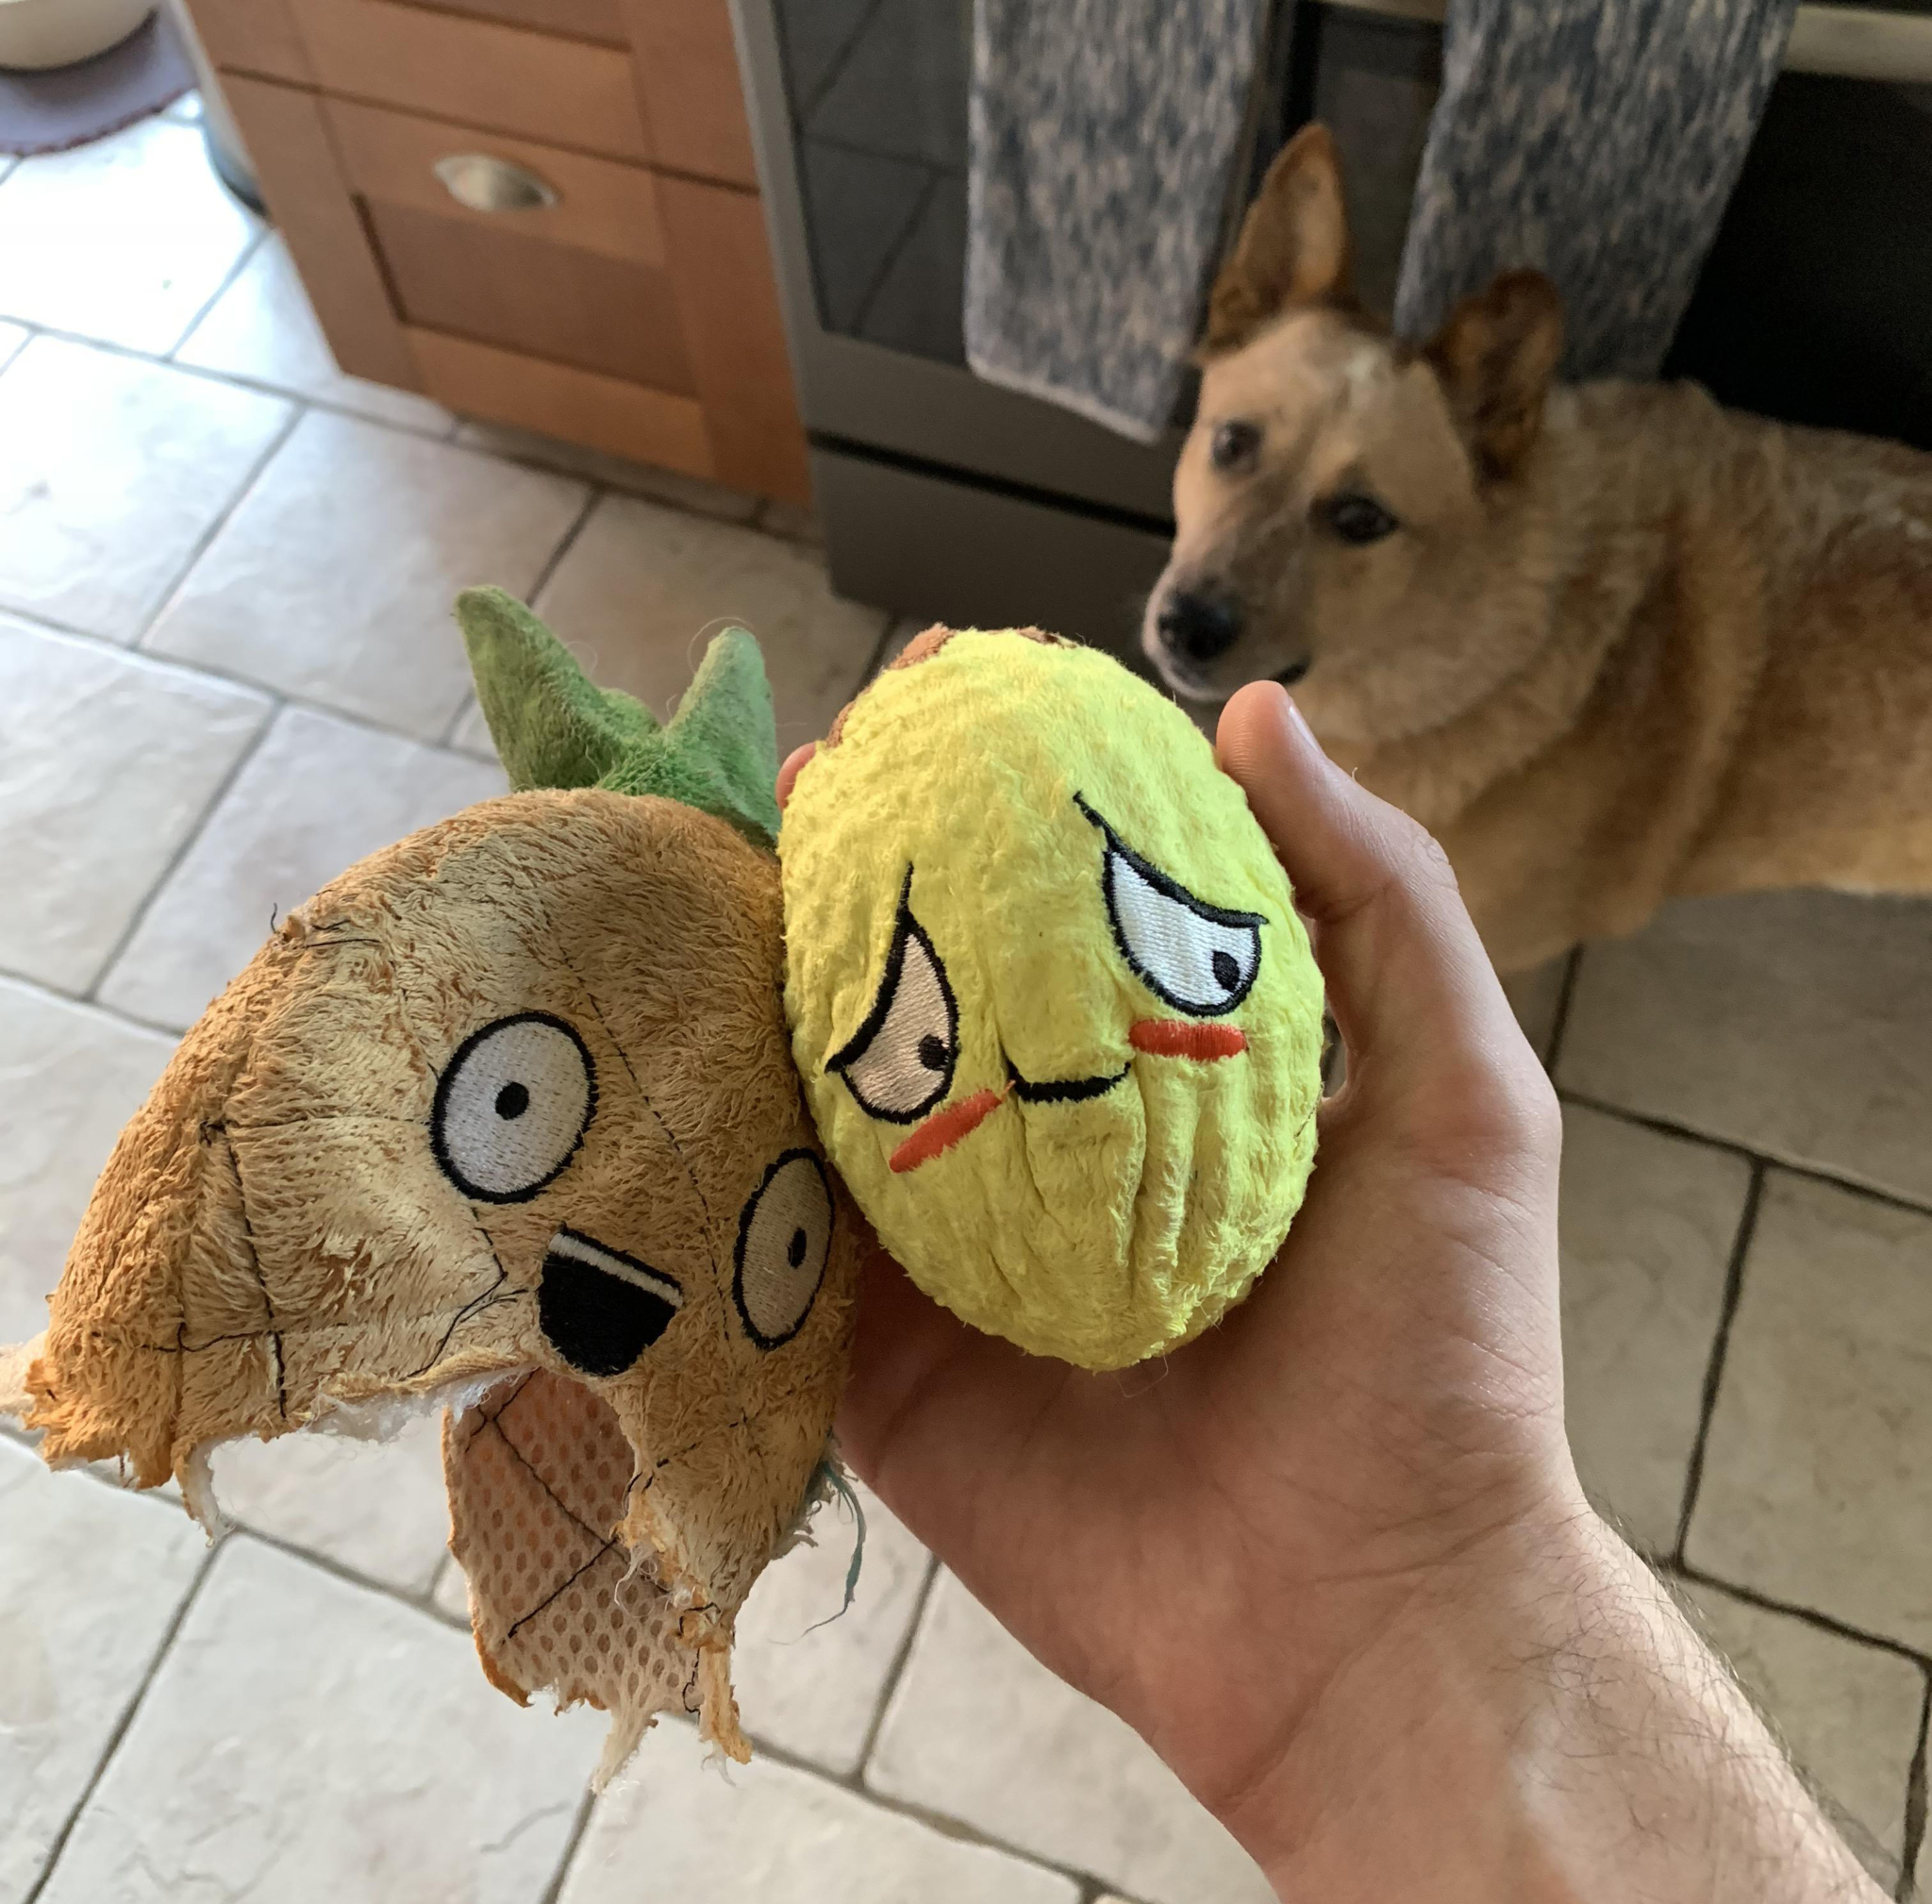 My dog's toy has another toy inside it for when she tears apart